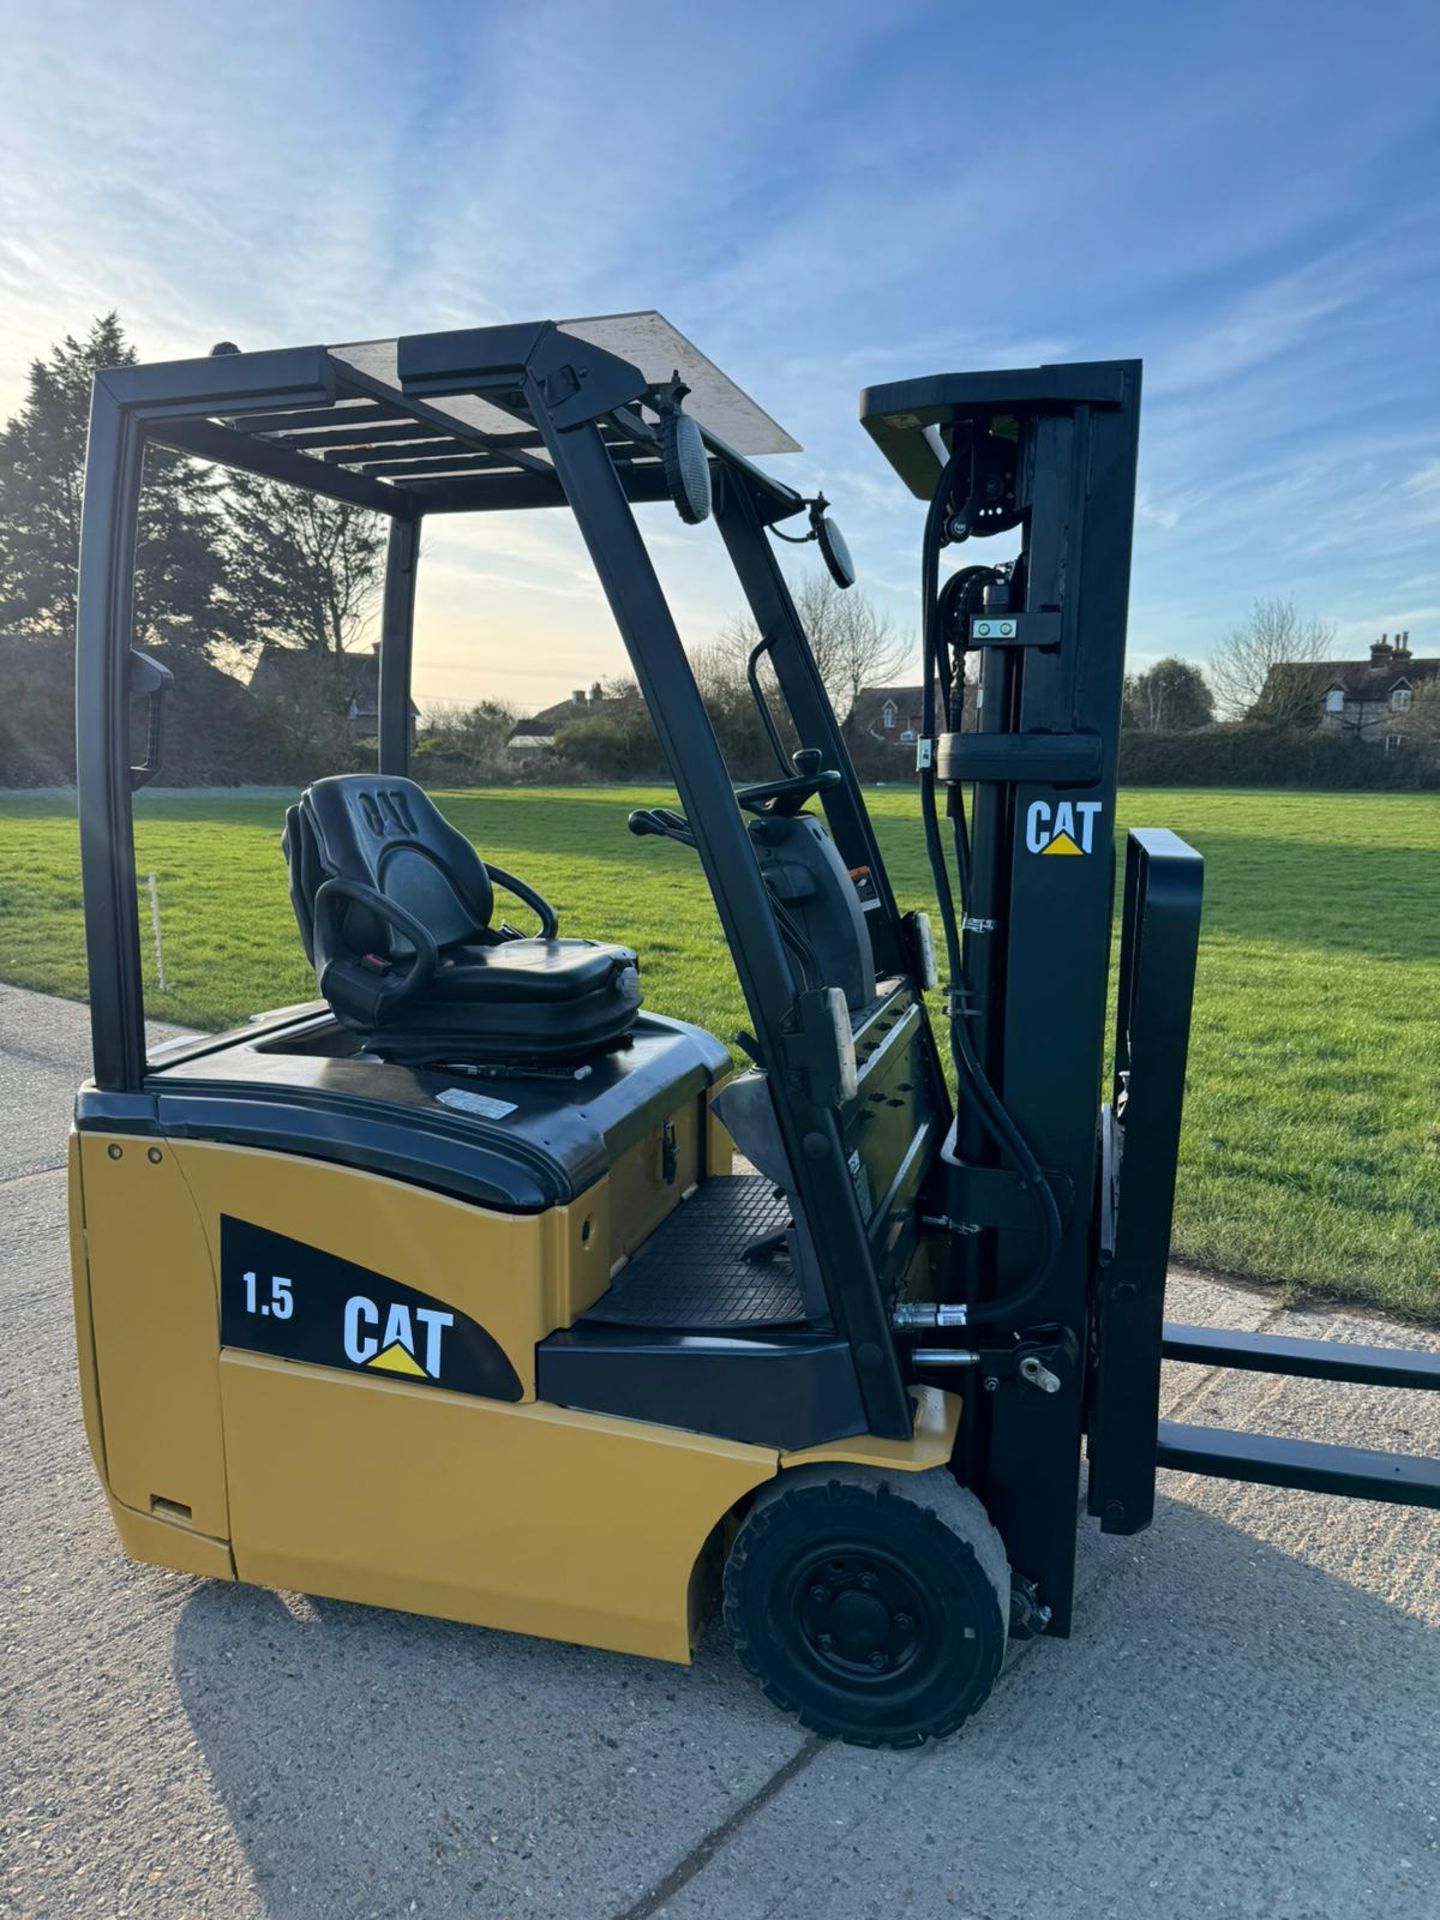 2017, CATERPILLAR 1.5 Electric Forklift Truck (Container Spec) - Image 2 of 4